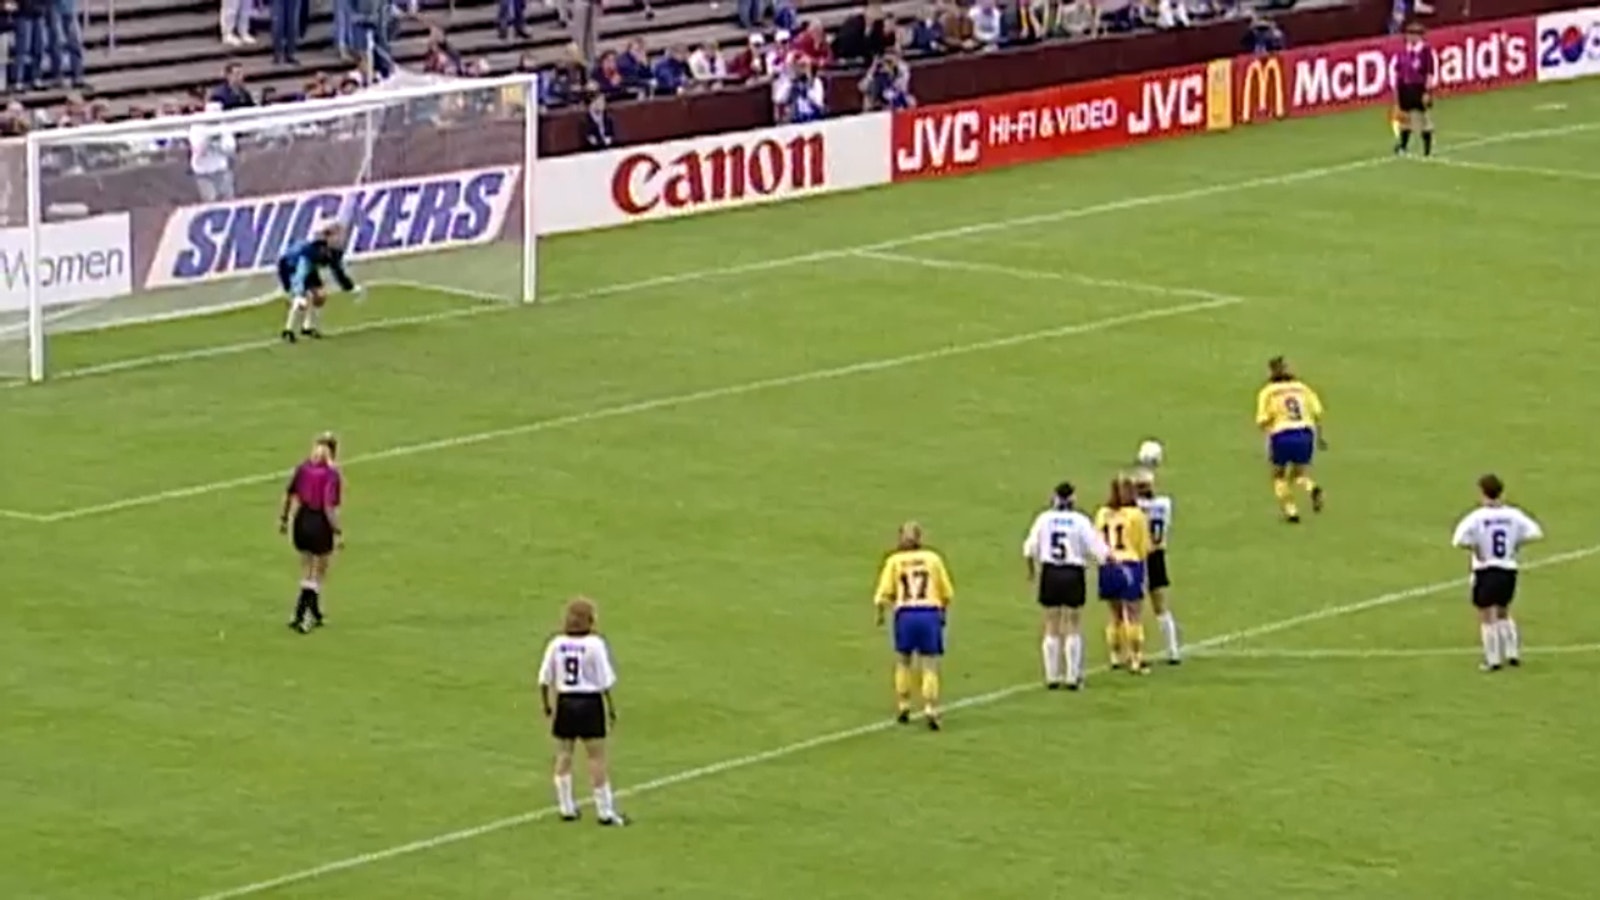 Sweden's Epic Comeback: No. 17 | Most Memorable Moments in Women's World Cup History